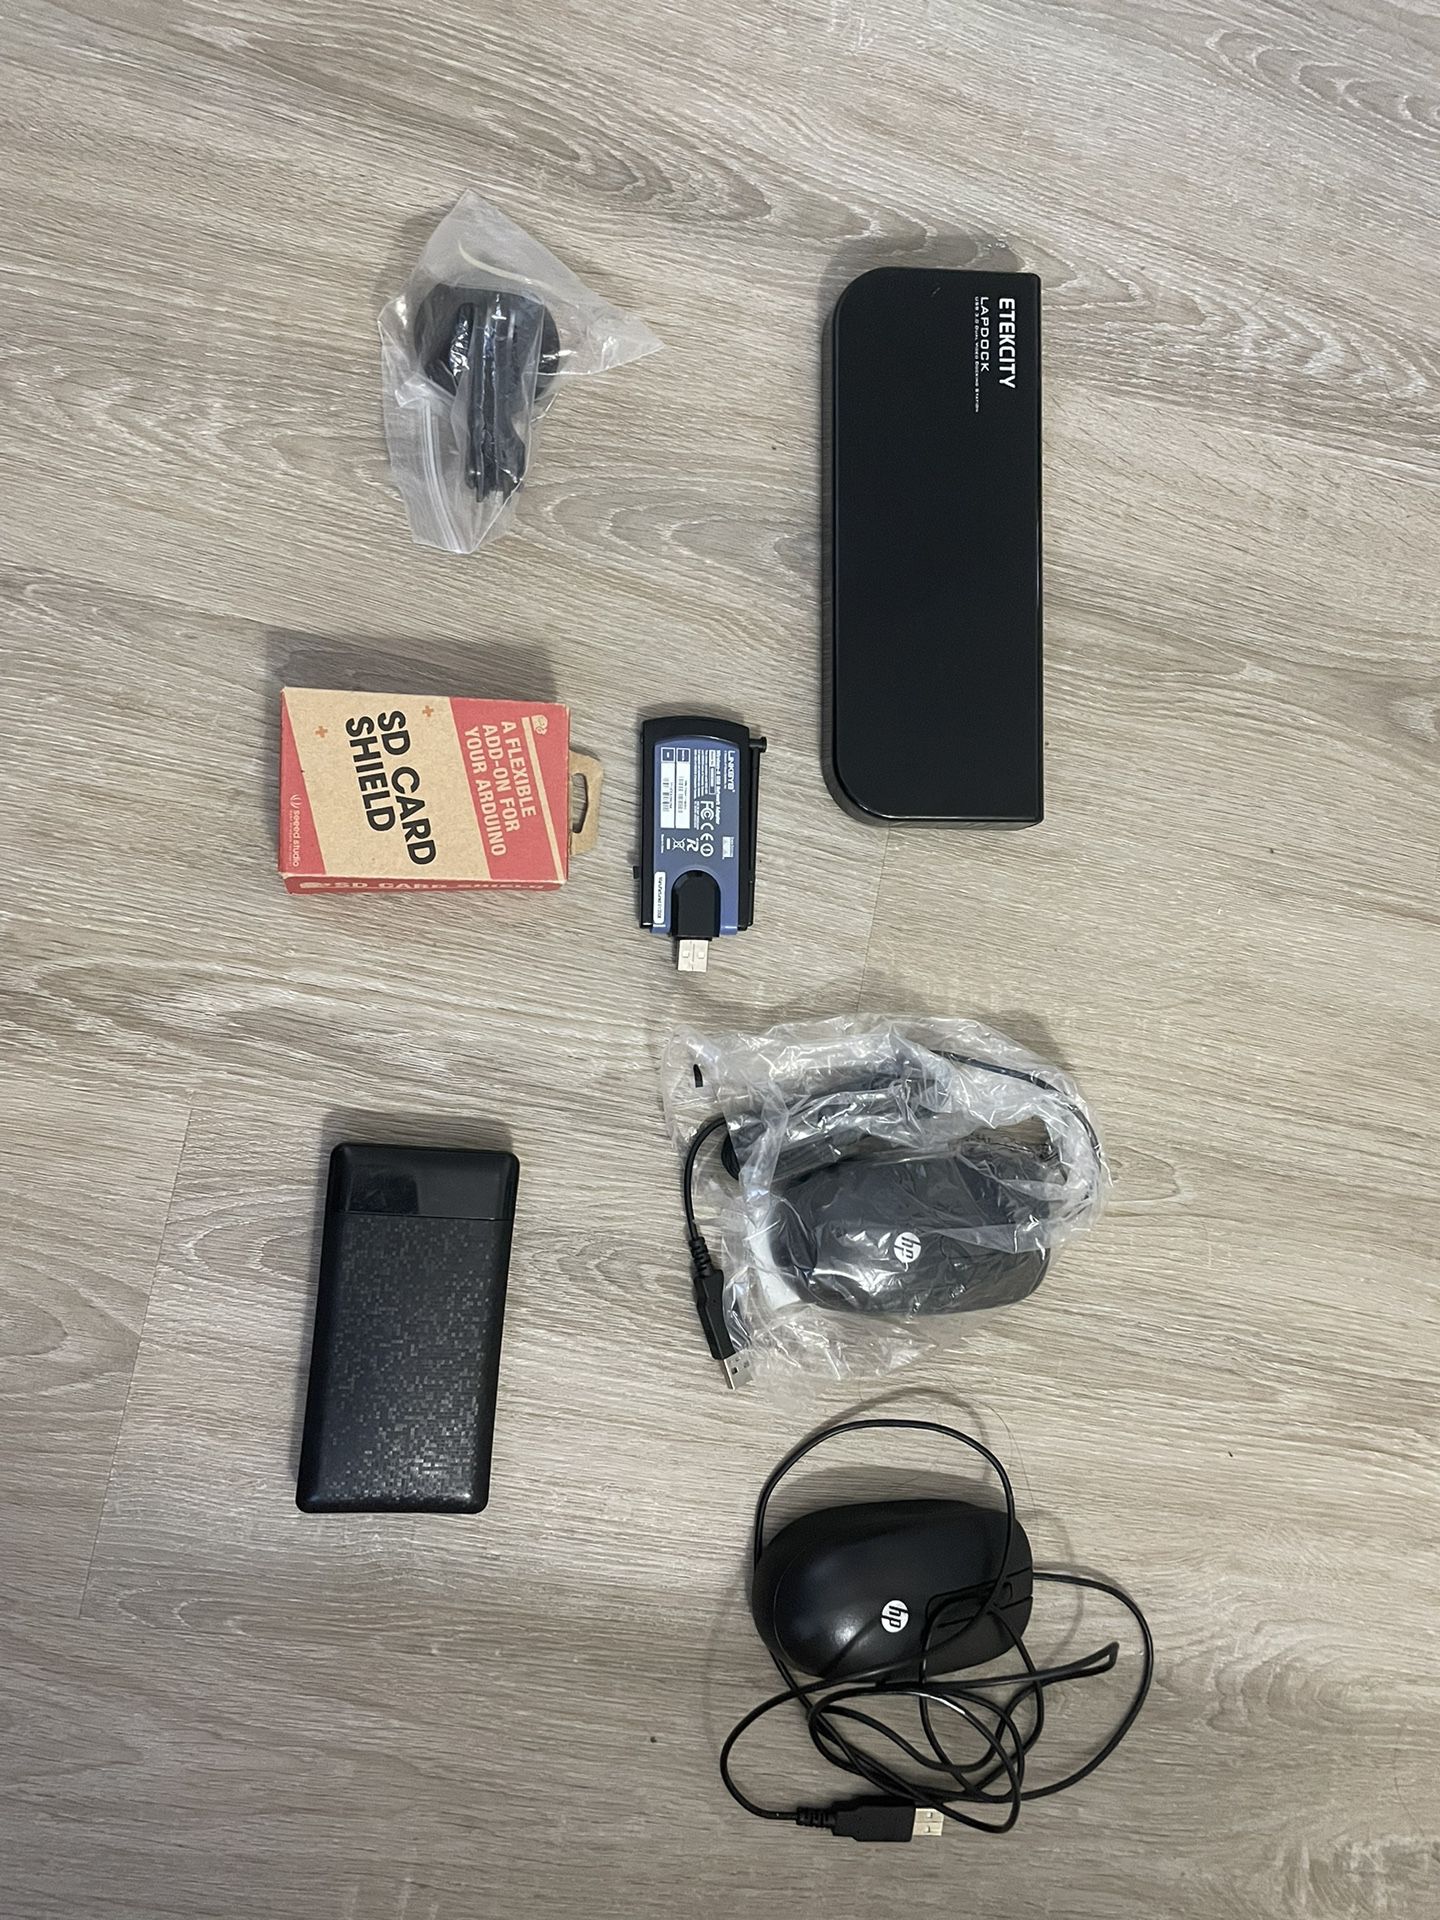 2 Hp mouse, Eteckcity , Lap dock, Linksys Wireless-n USB Network Adapter, SD Card Shield, Holder And Power Bank.